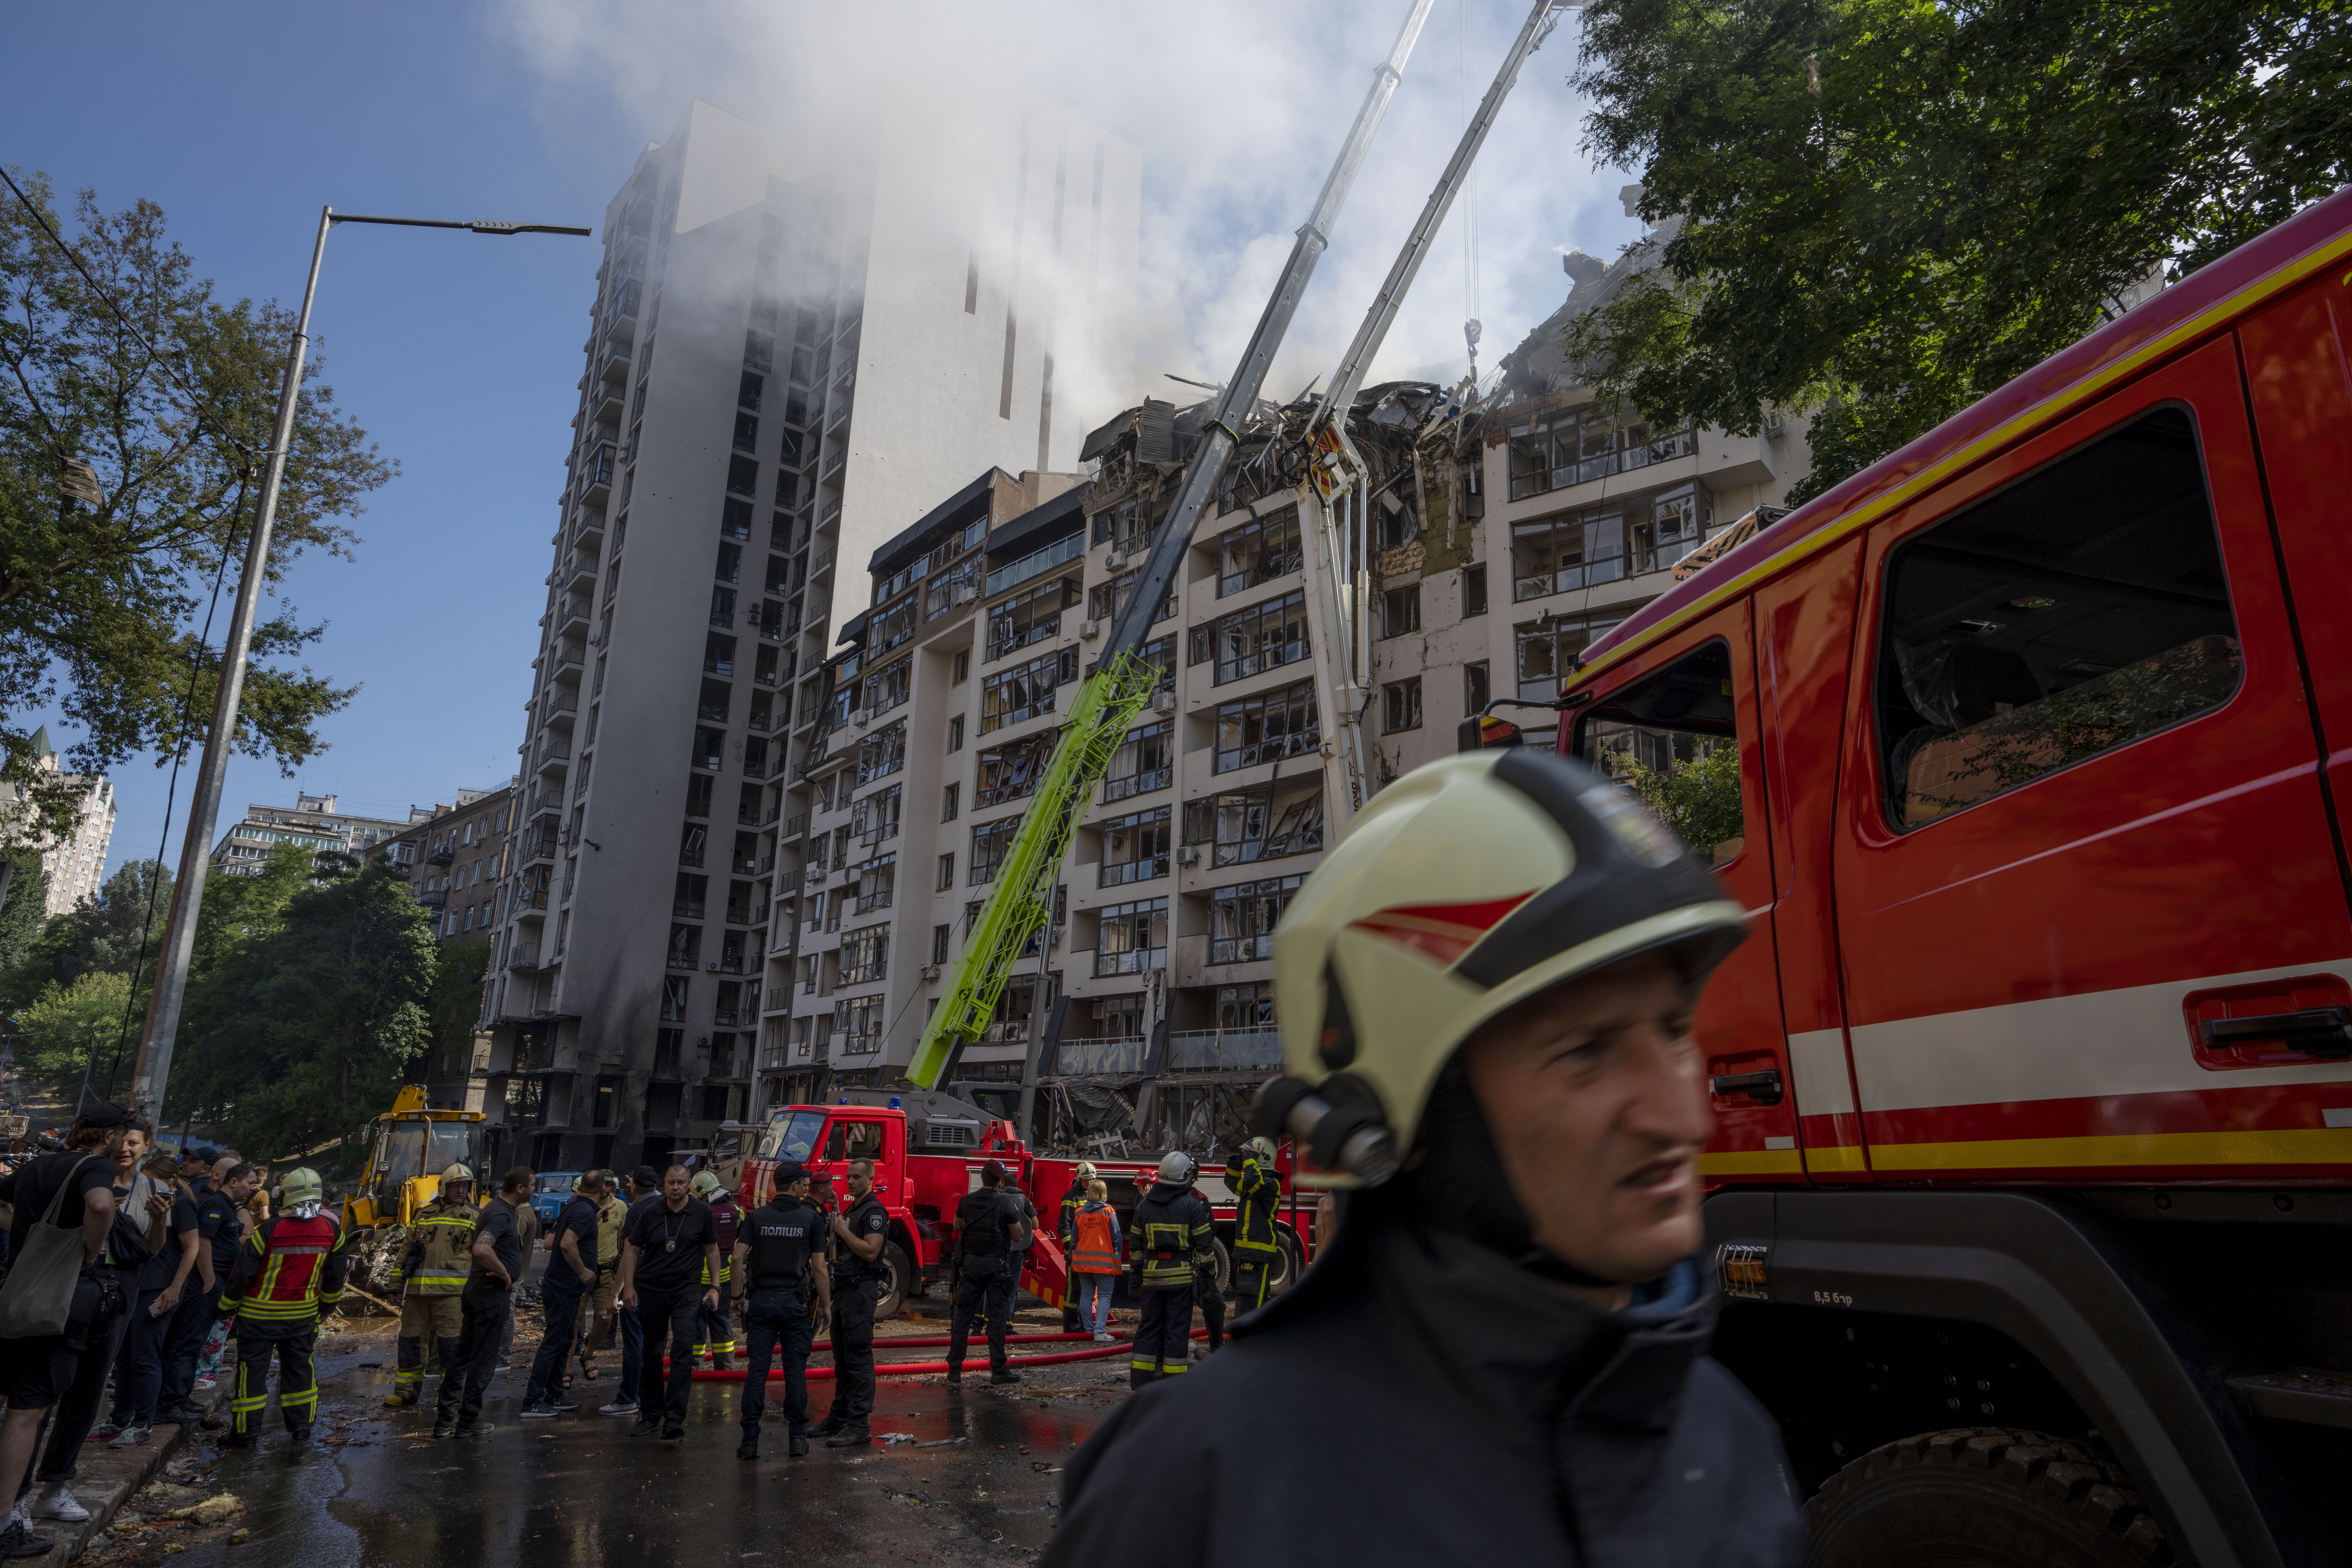 Firefighters work at the scene of a residential building following explosions, in Kyiv, Ukraine, Sunday, June 26, 2022. Several explosions rocked the west of the Ukrainian capital in the early hours of Sunday morning, with at least two residential buildings struck, according to Kyiv mayor Vitali Klitschko